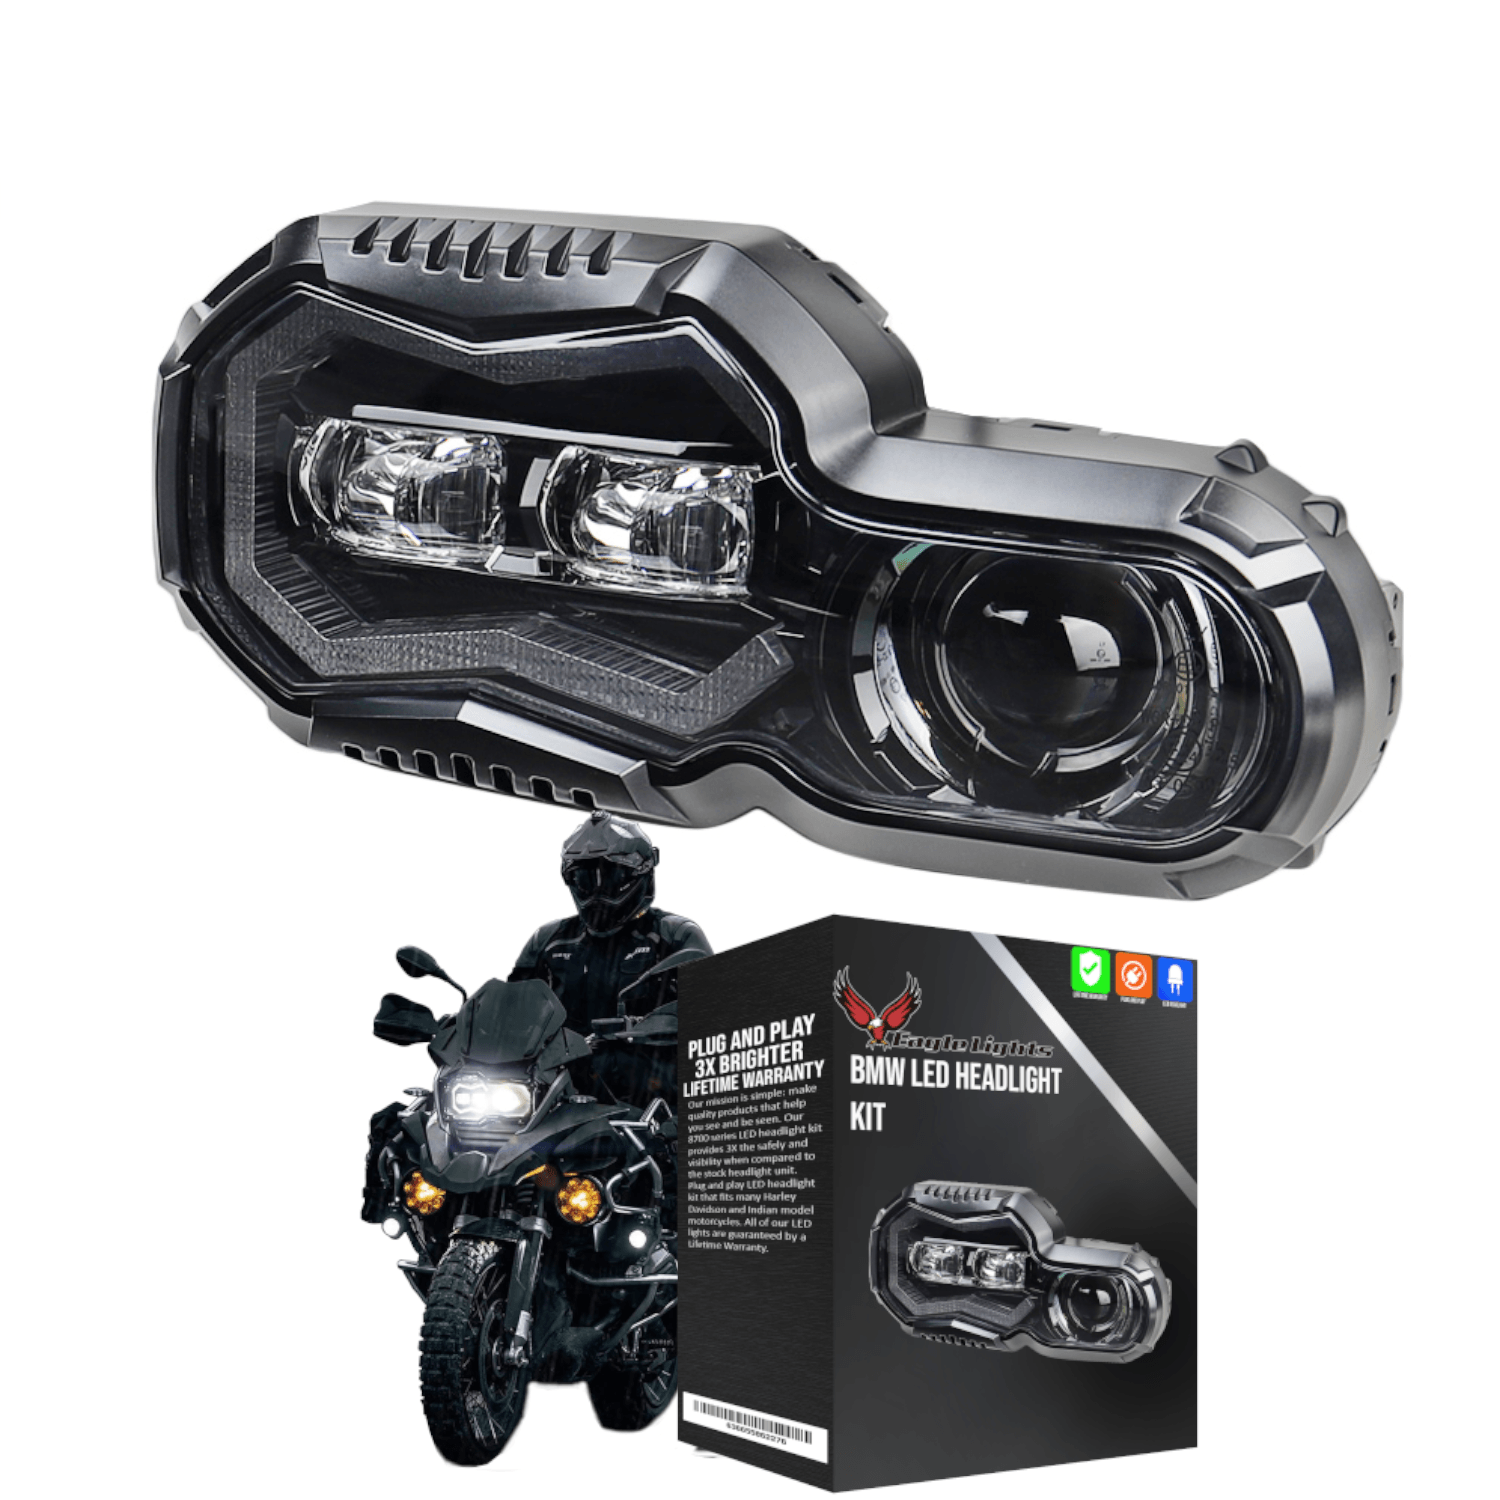 Eagle Lights LED Headlight Kit with Halo Ring for 2008-2018 BMW F650GS, F700GS, F800GS